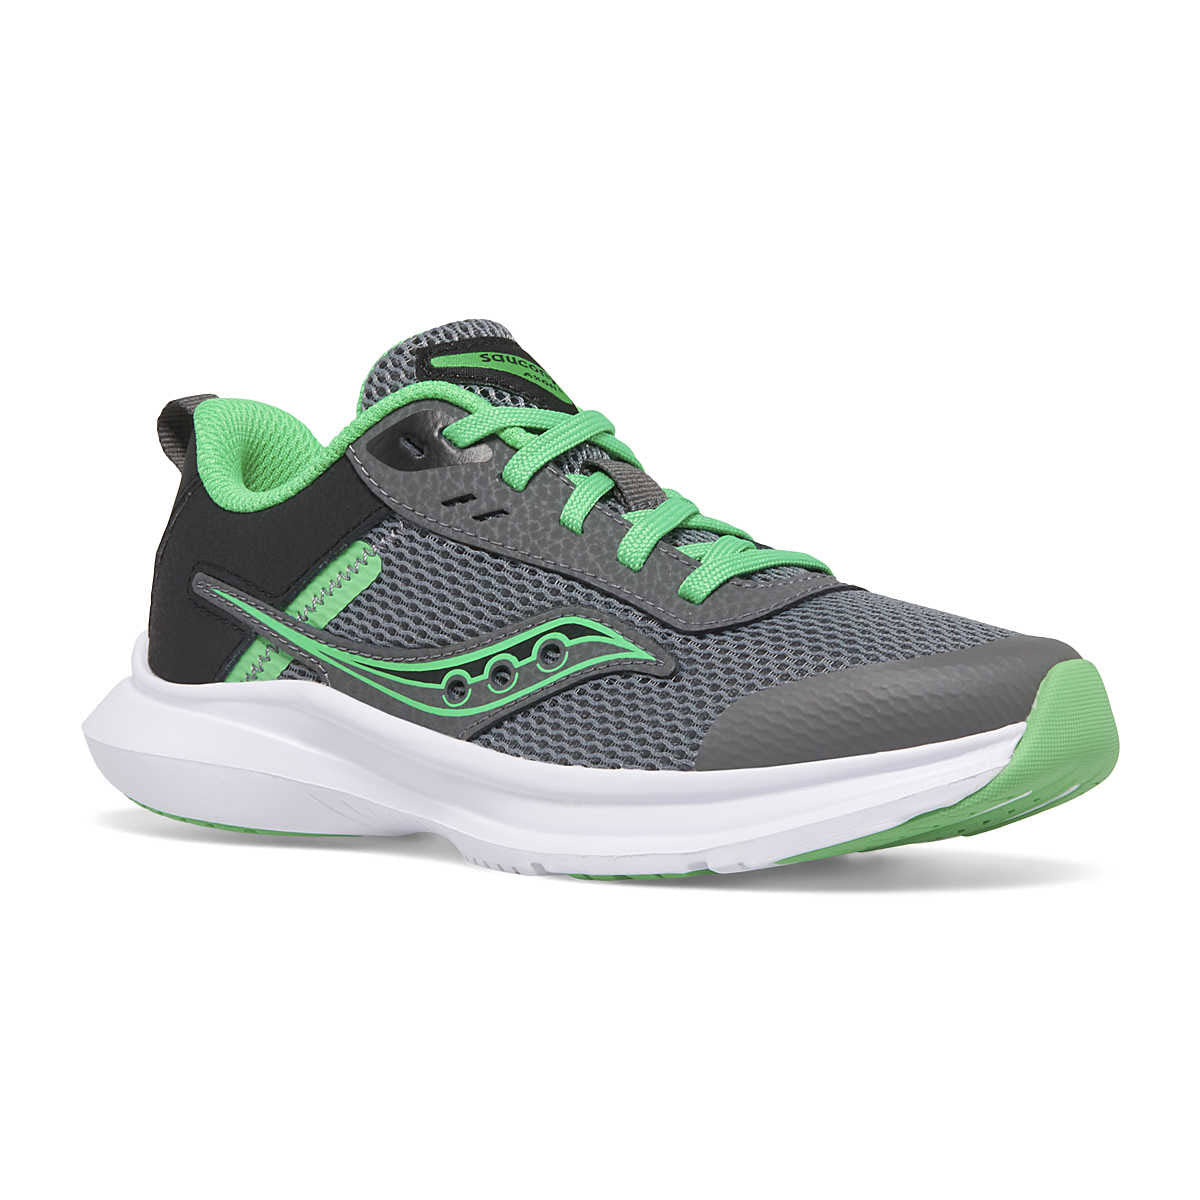 A gray and lime green Saucony Kids Axon 3 athletic shoe with a white sole and green laces, featuring a distinct, curvy logo on the side.